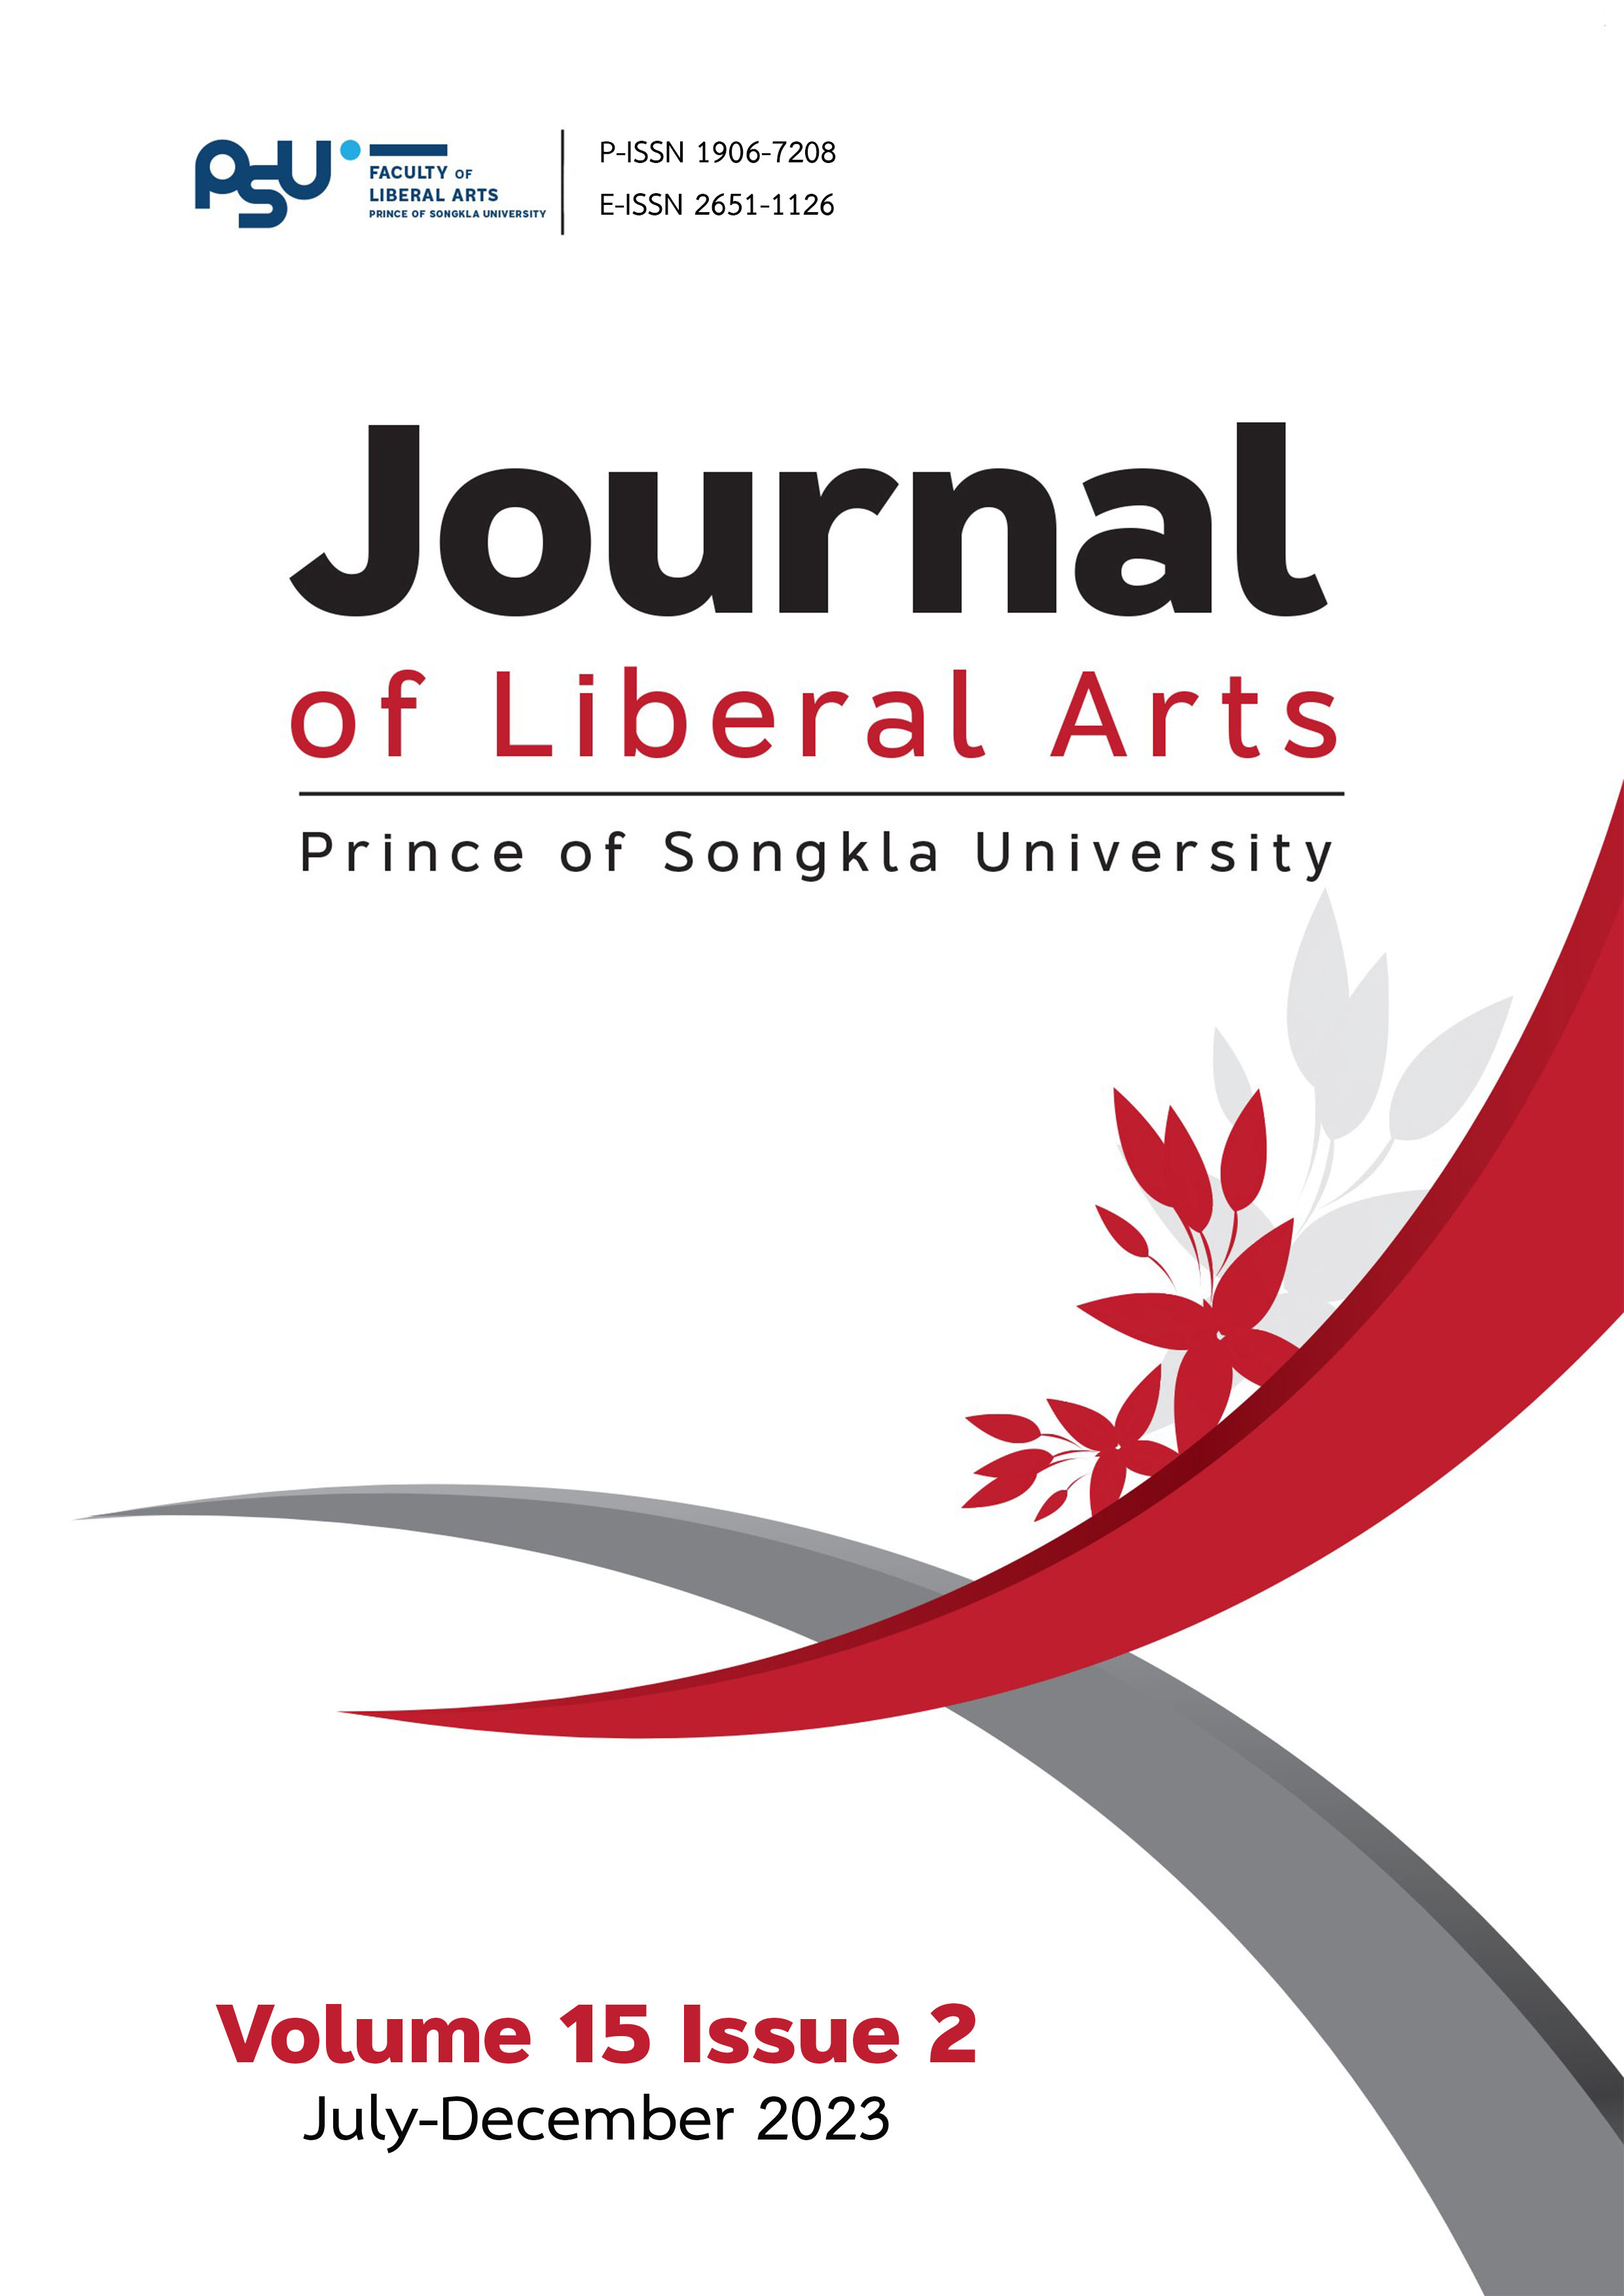 					View Vol. 15 No. 2 (2023): Journal of Liberal Arts, Prince of Songkla University 
				